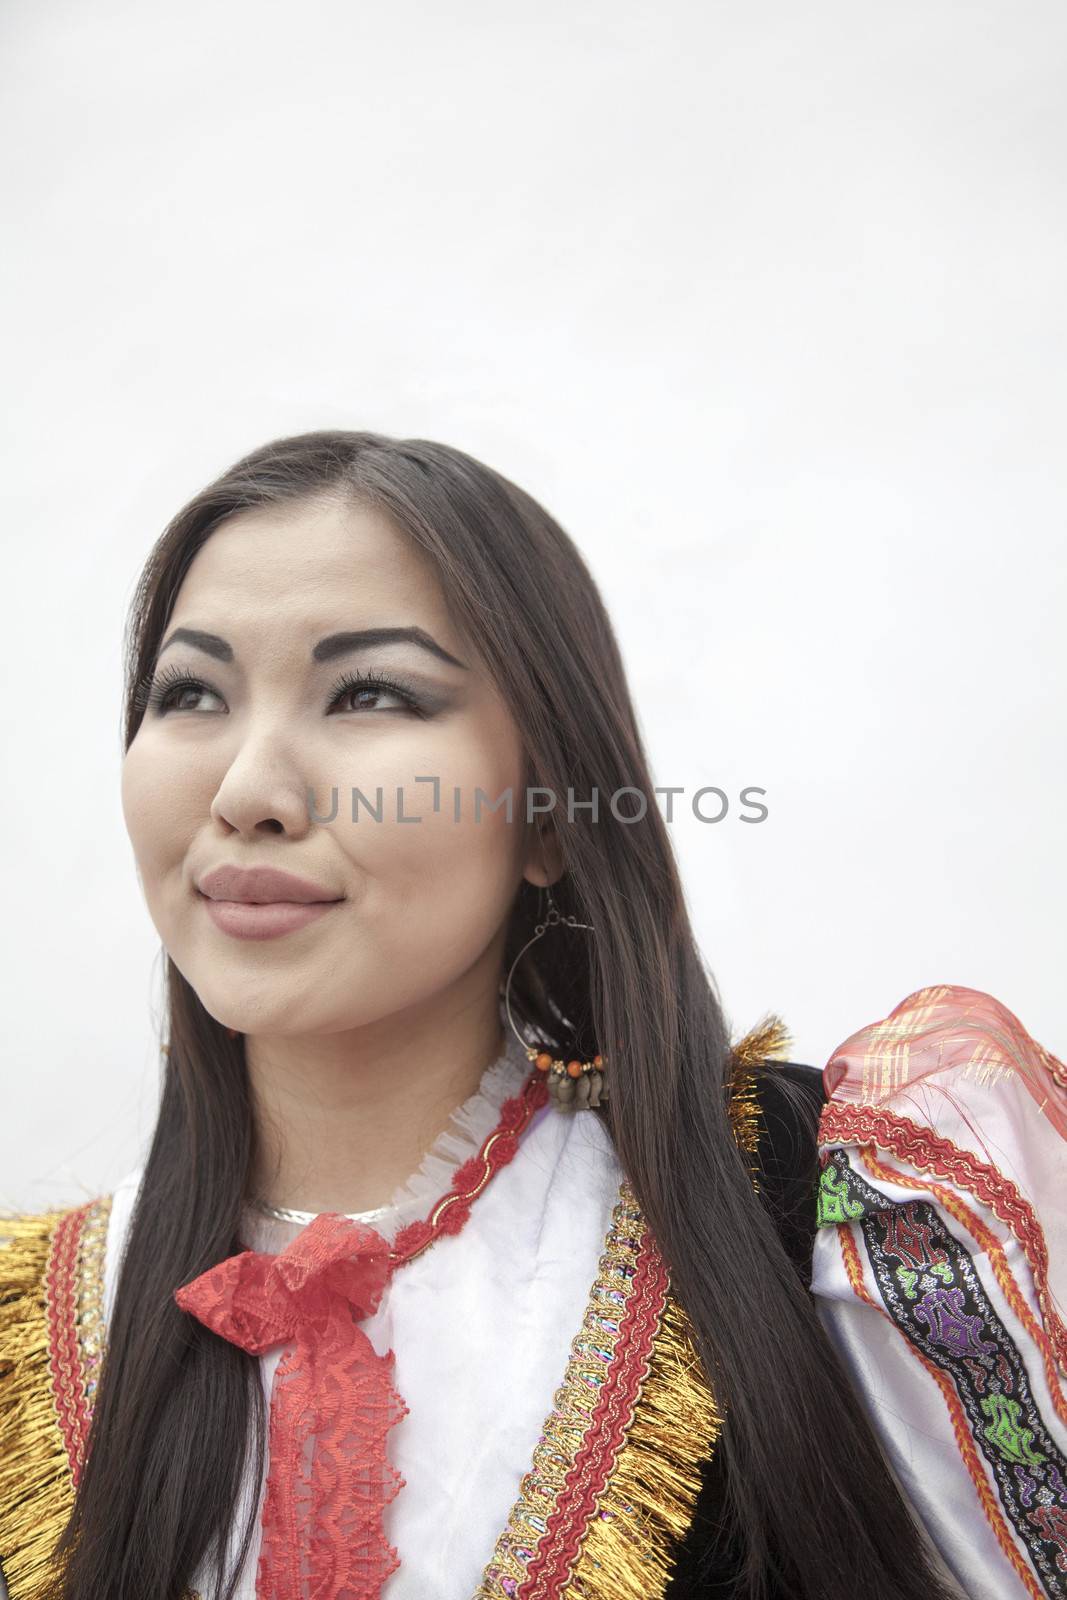 Portrait of young smiling woman in traditional clothing, studio shot